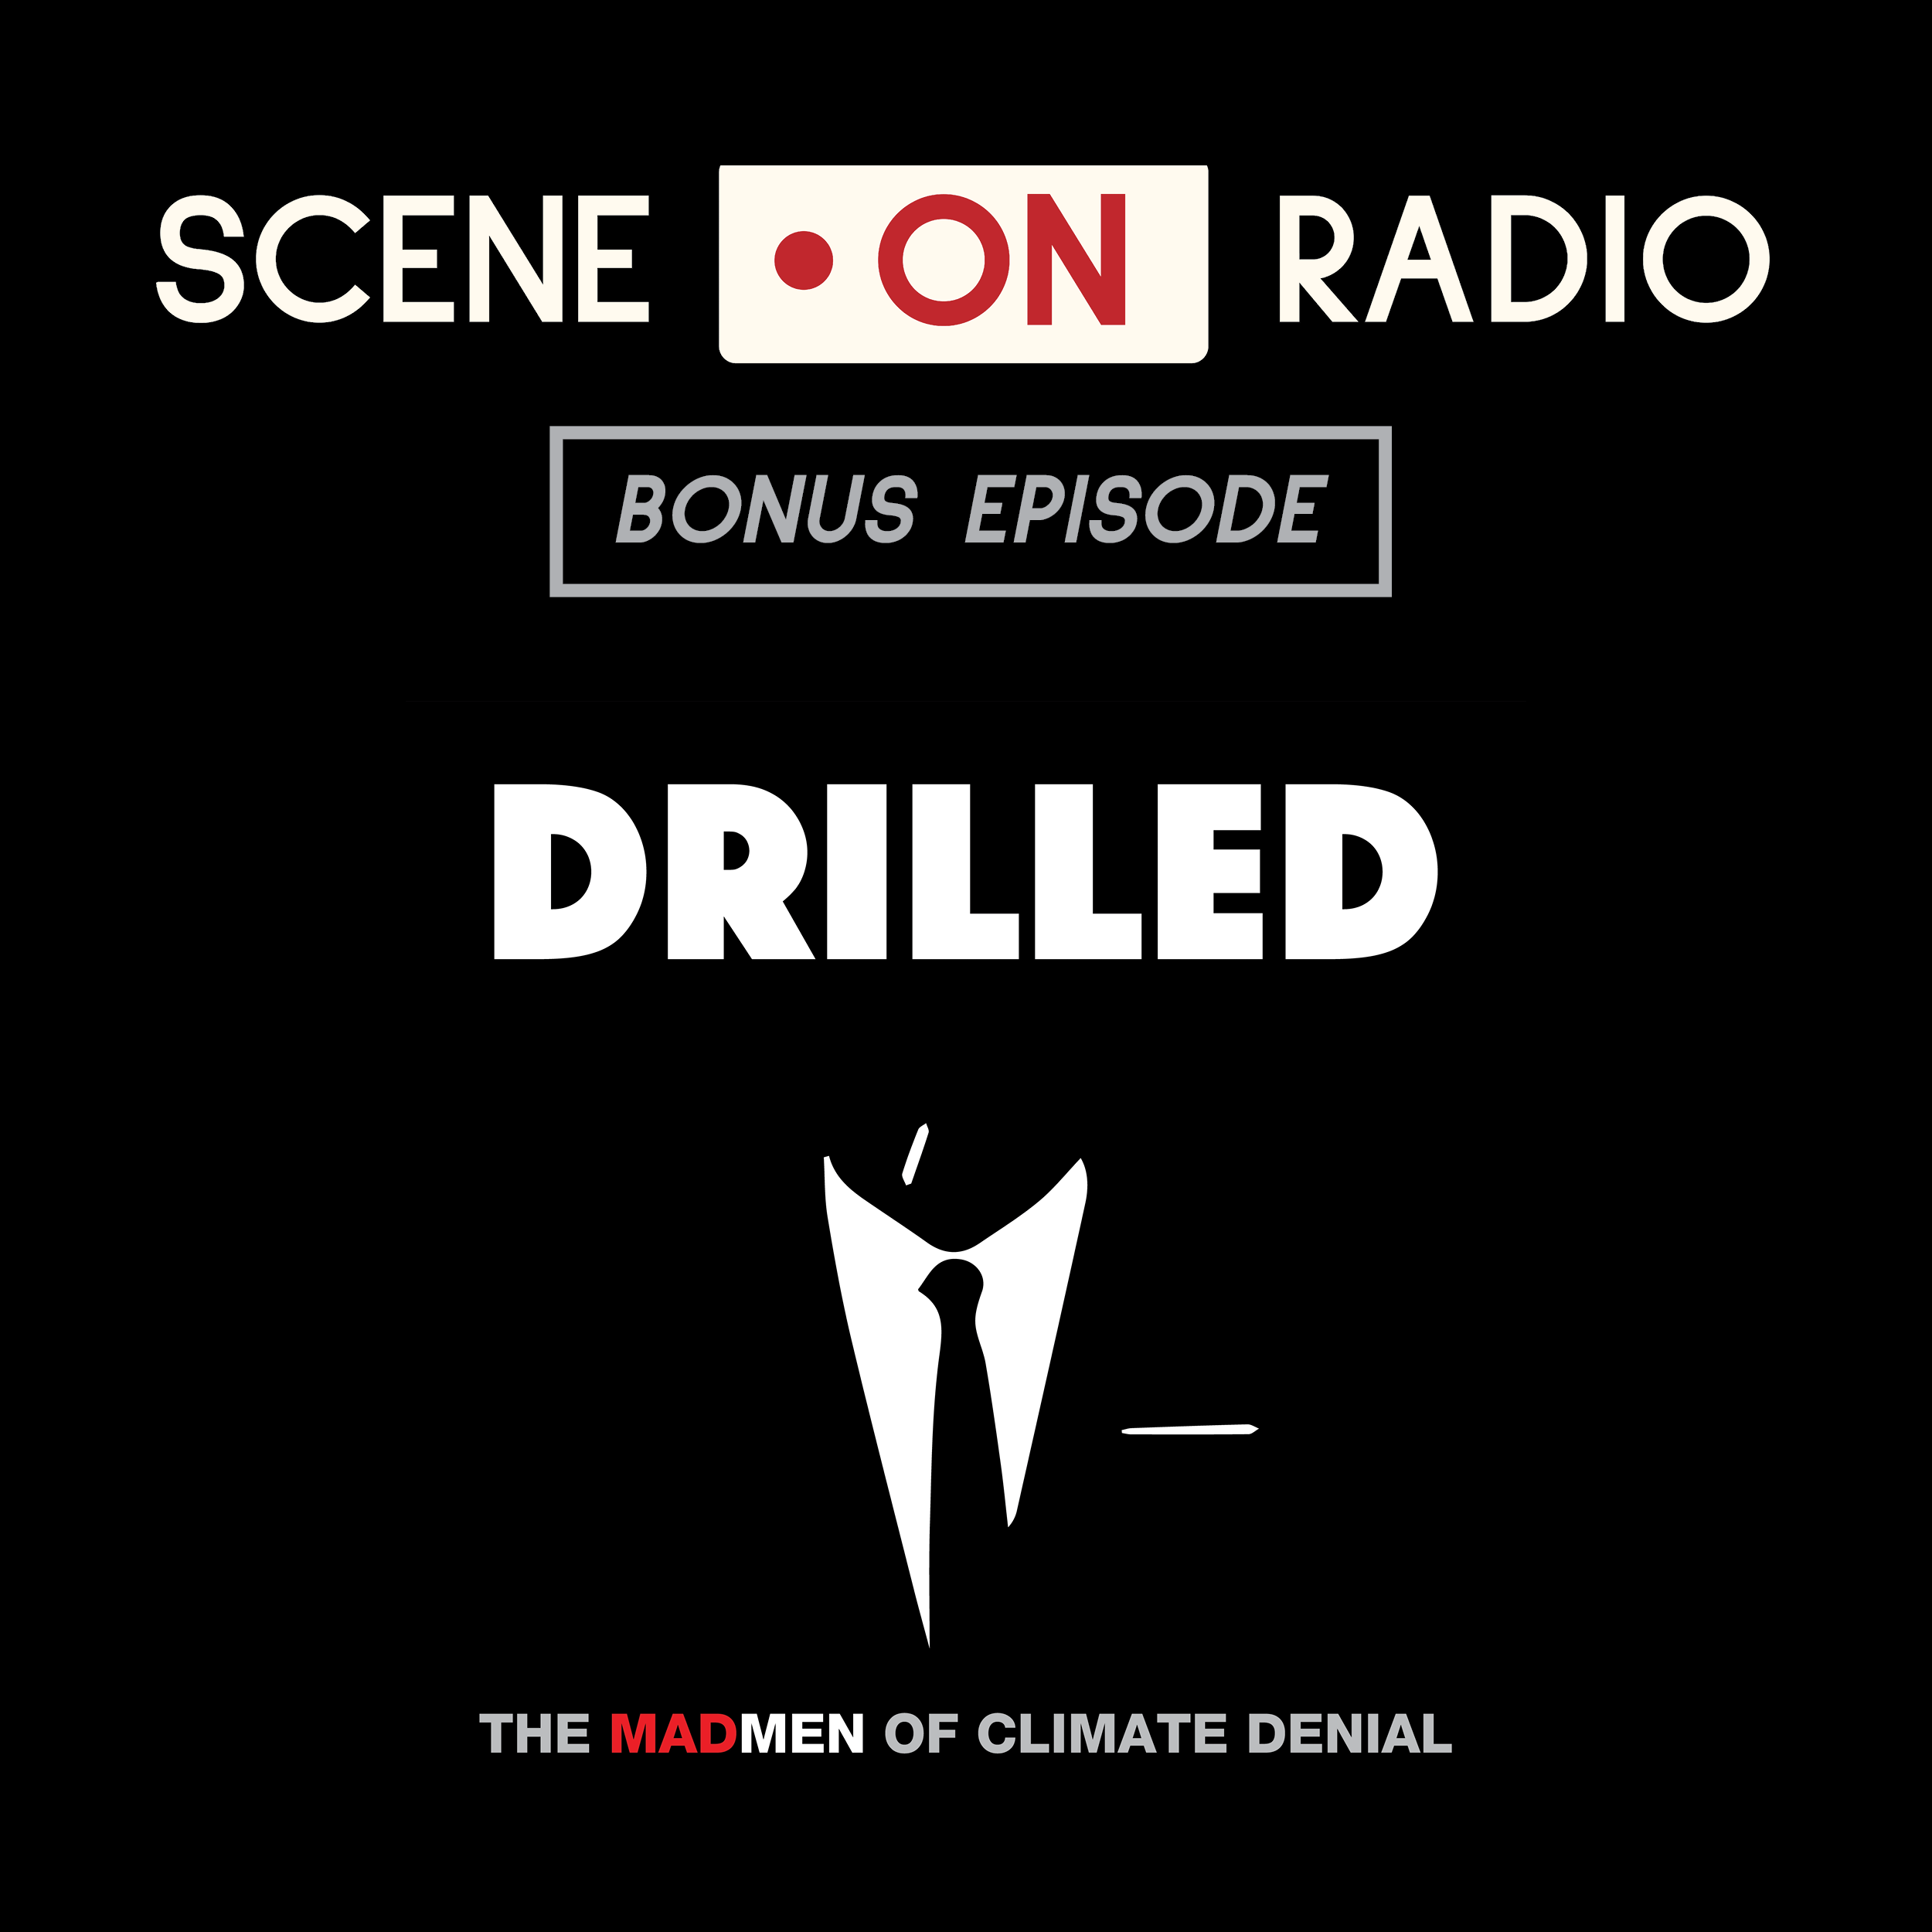 Text: Scene On Radio. Bonus Episode. Drilled: The Madmen of Climate Denial. Image: A minimalist vector image of a suit and tie.